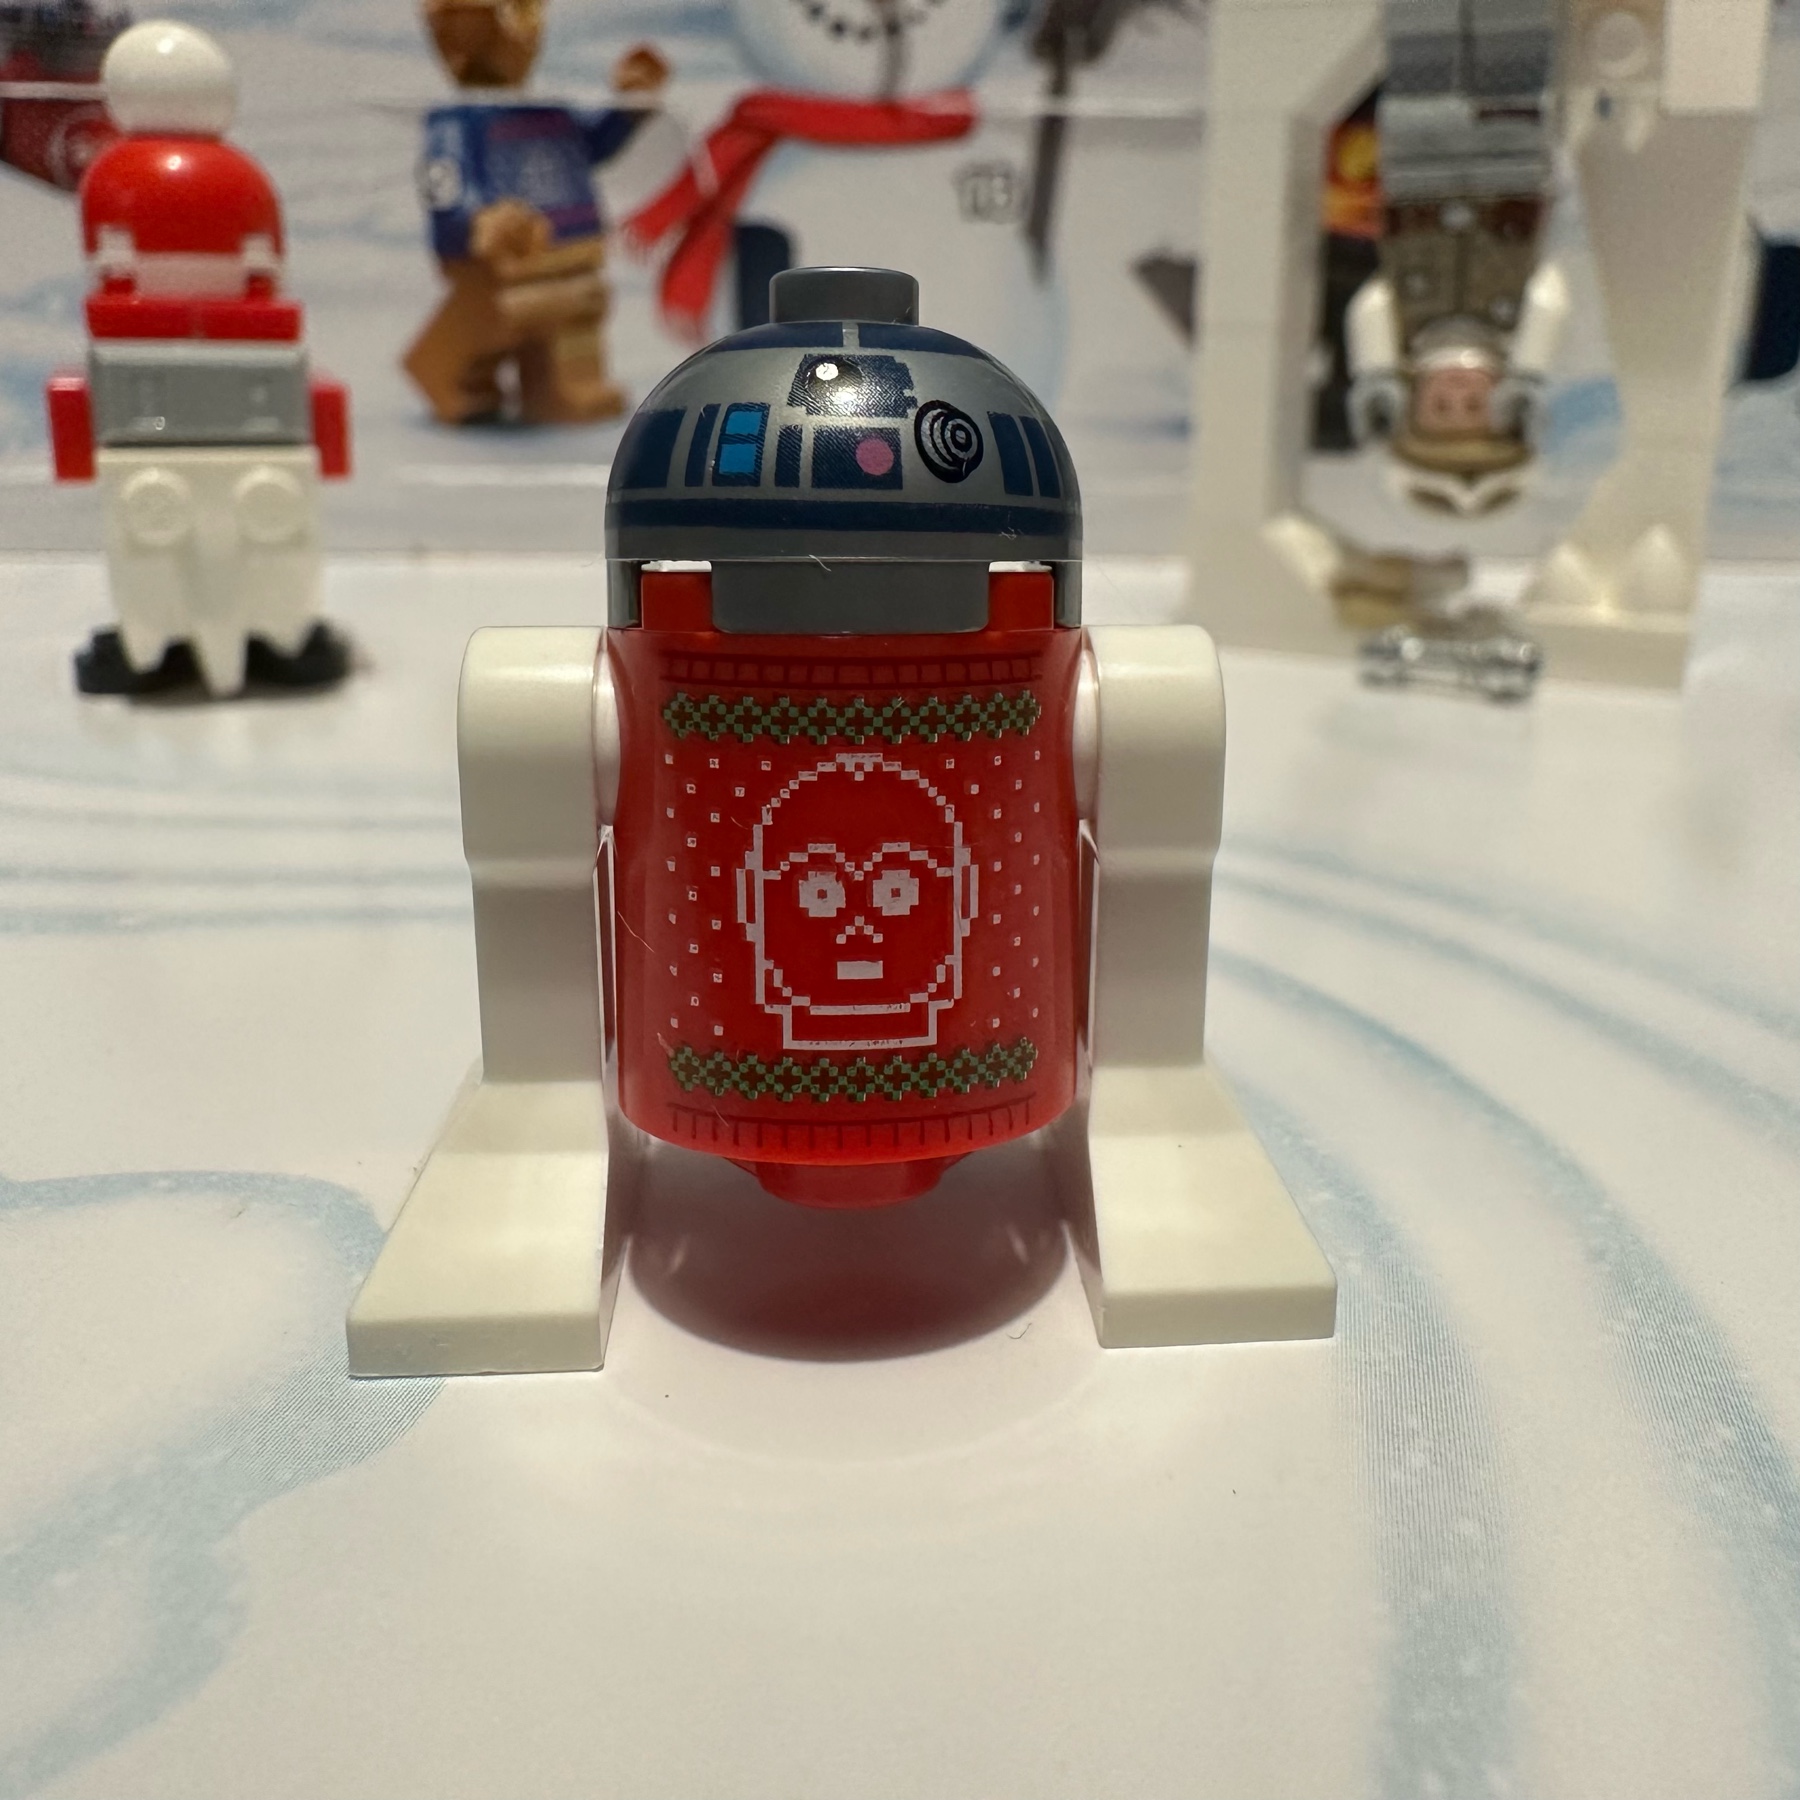 LEGO R2-D2 droid wearing an ugly sweater with a C-3PO pattern